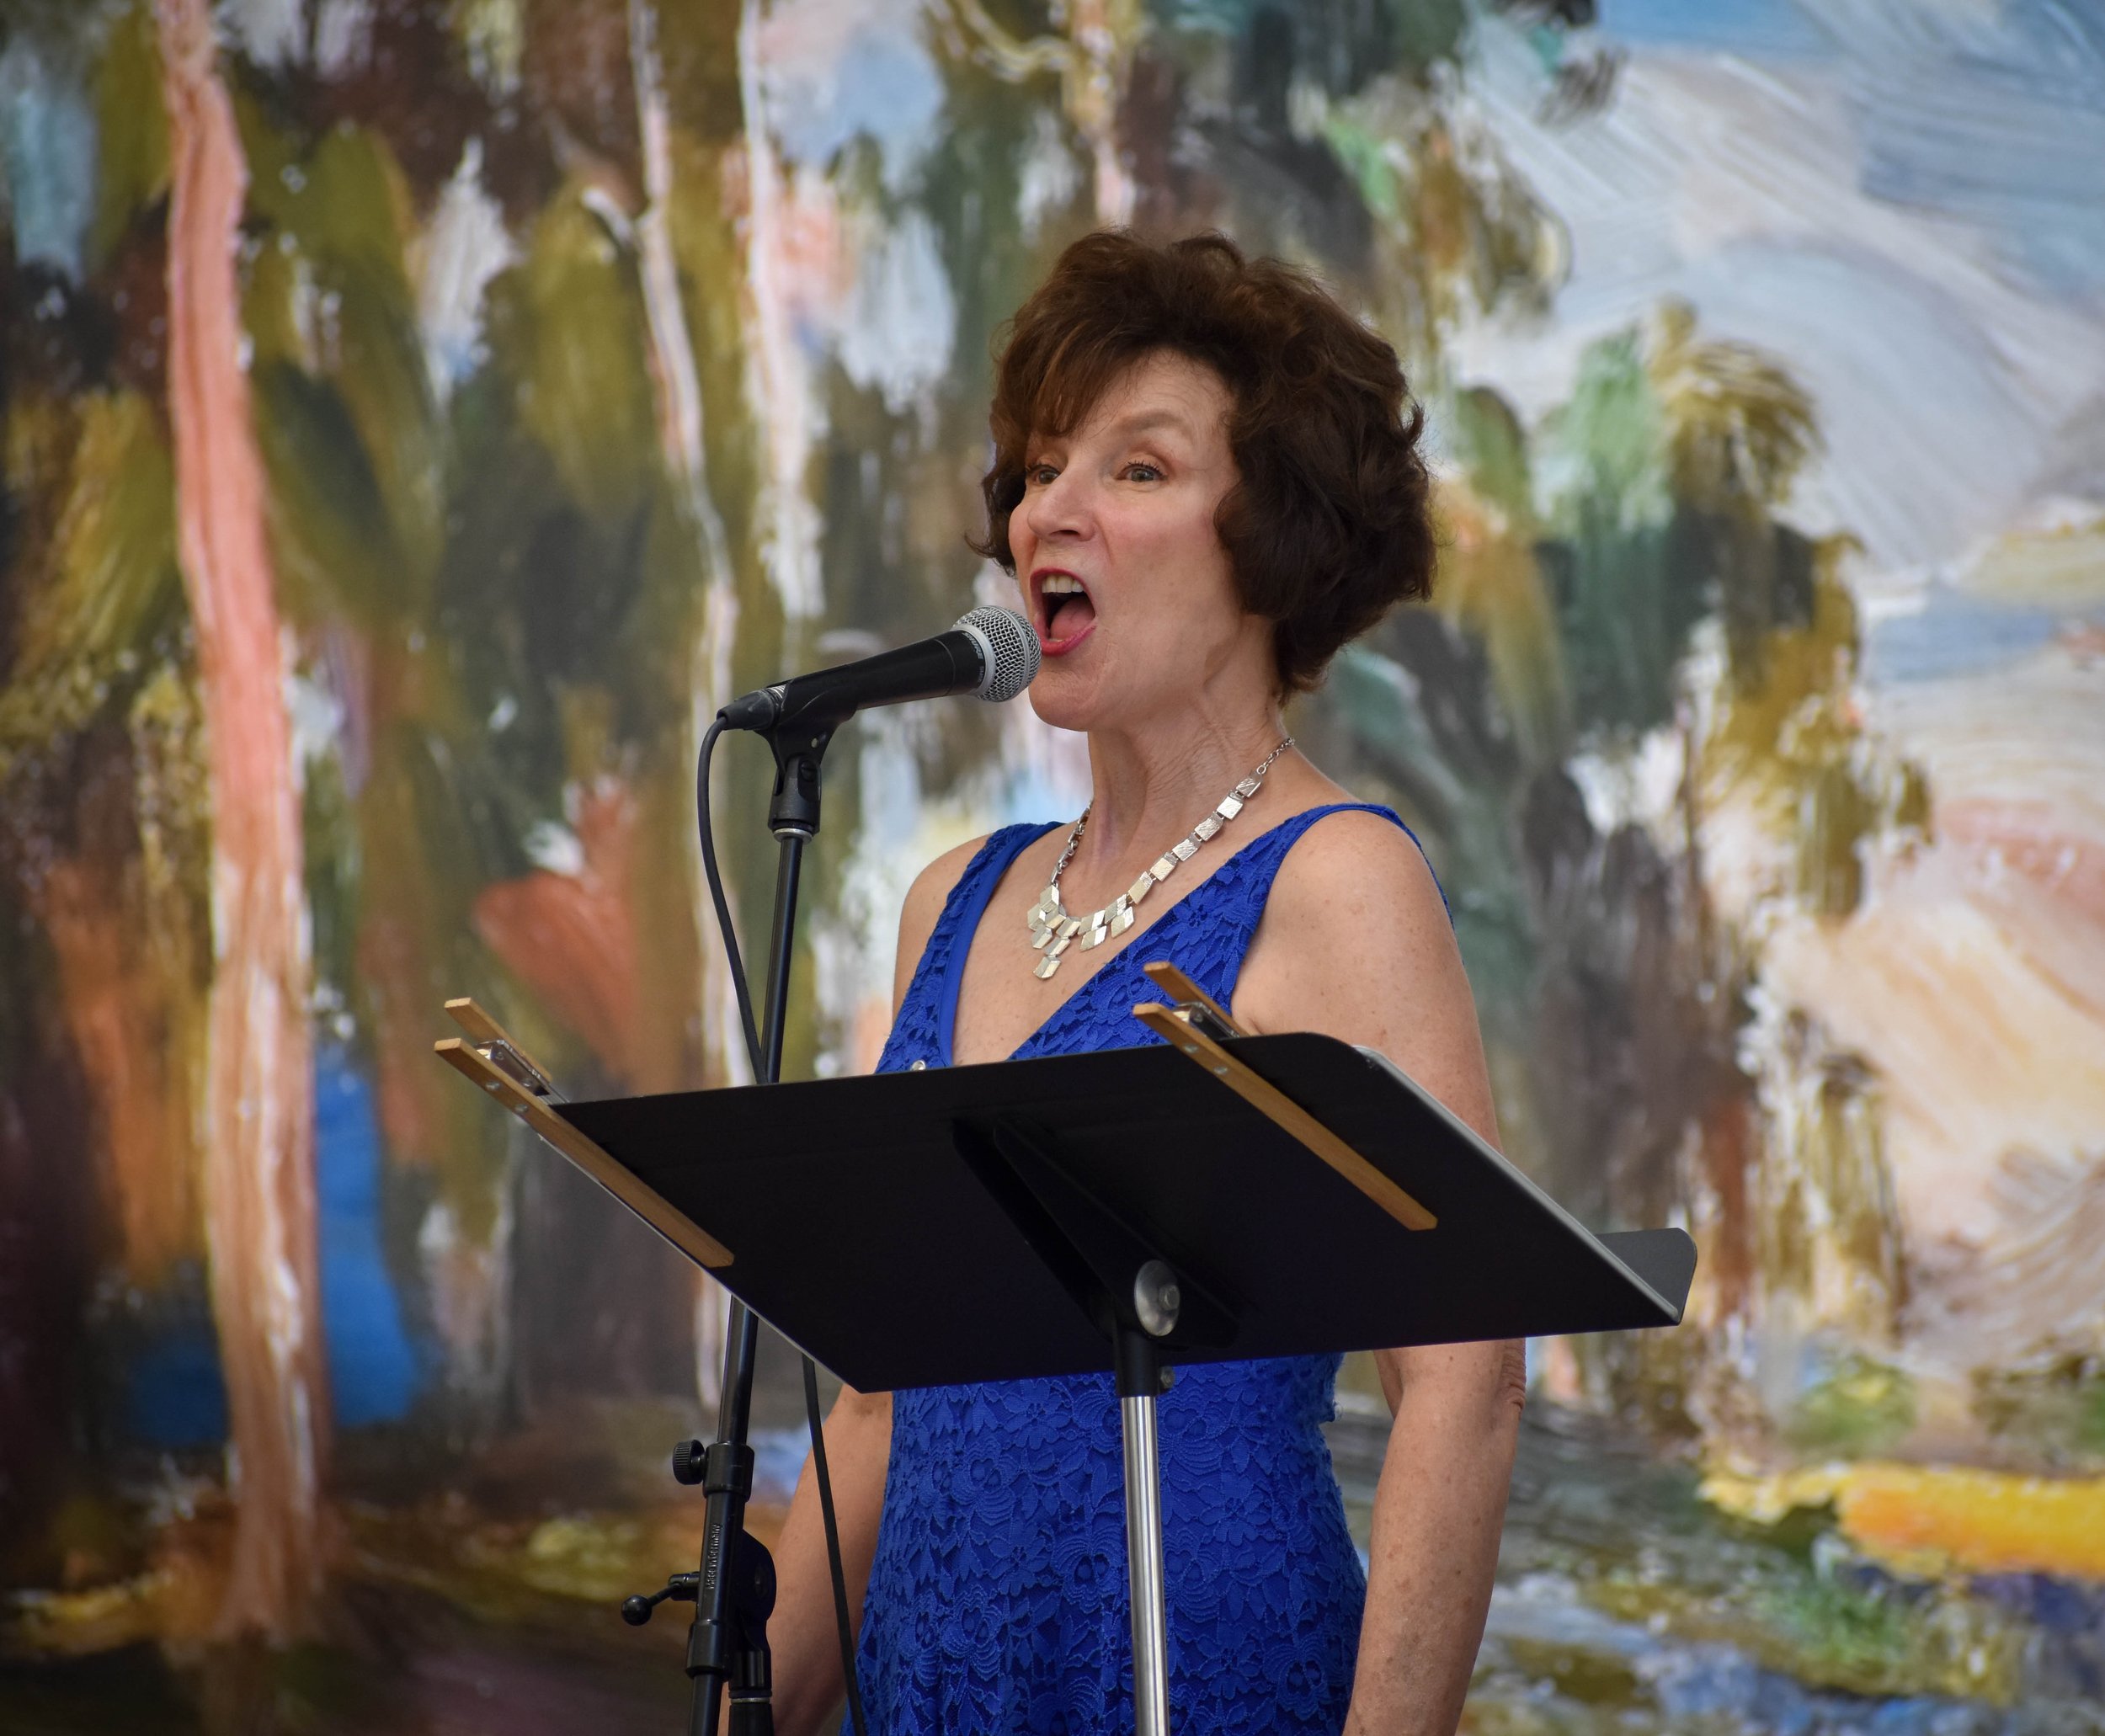 07-17-2022 LCCB Fest of Arts Summer Concert Series by Peyton Webster69-32.jpg